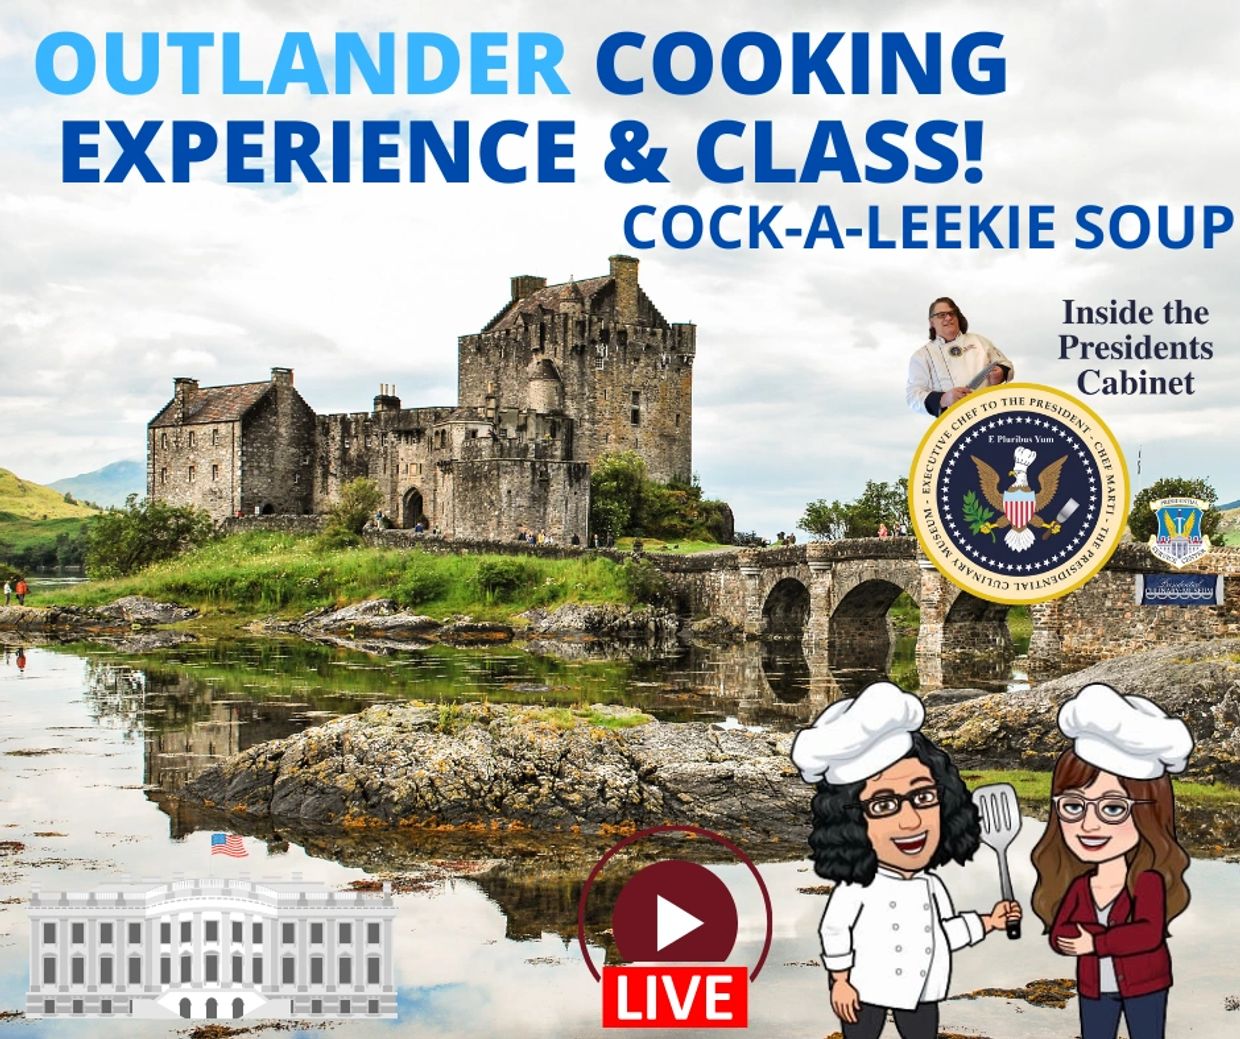 Outlander cooking classes showcasing Scotland and Scottish history.